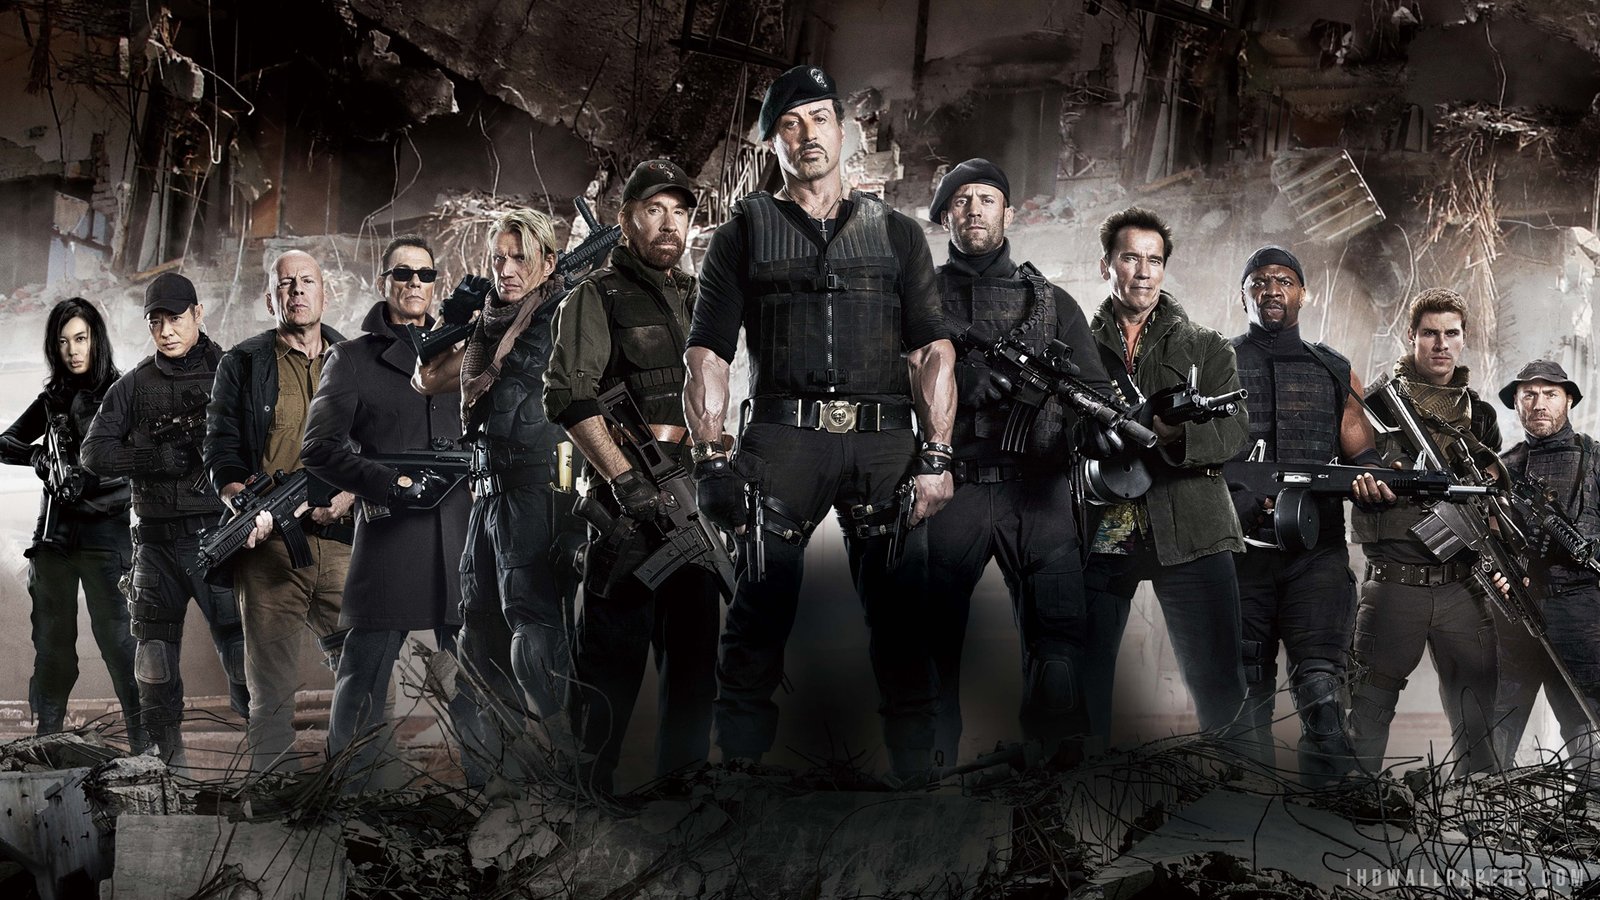  / The Expendables 2